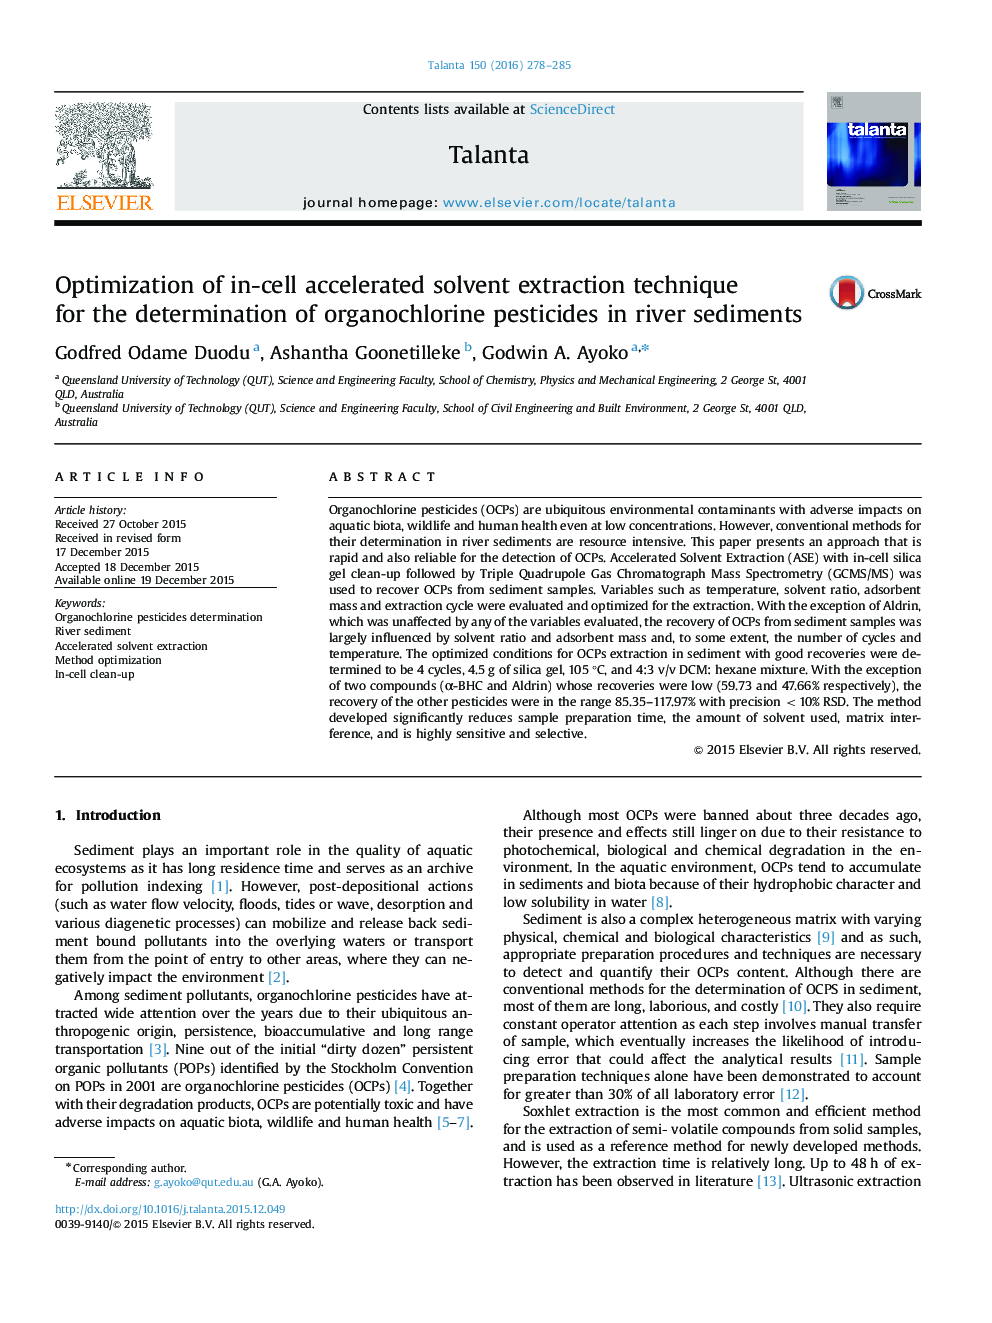 Optimization of in-cell accelerated solvent extraction technique for the determination of organochlorine pesticides in river sediments